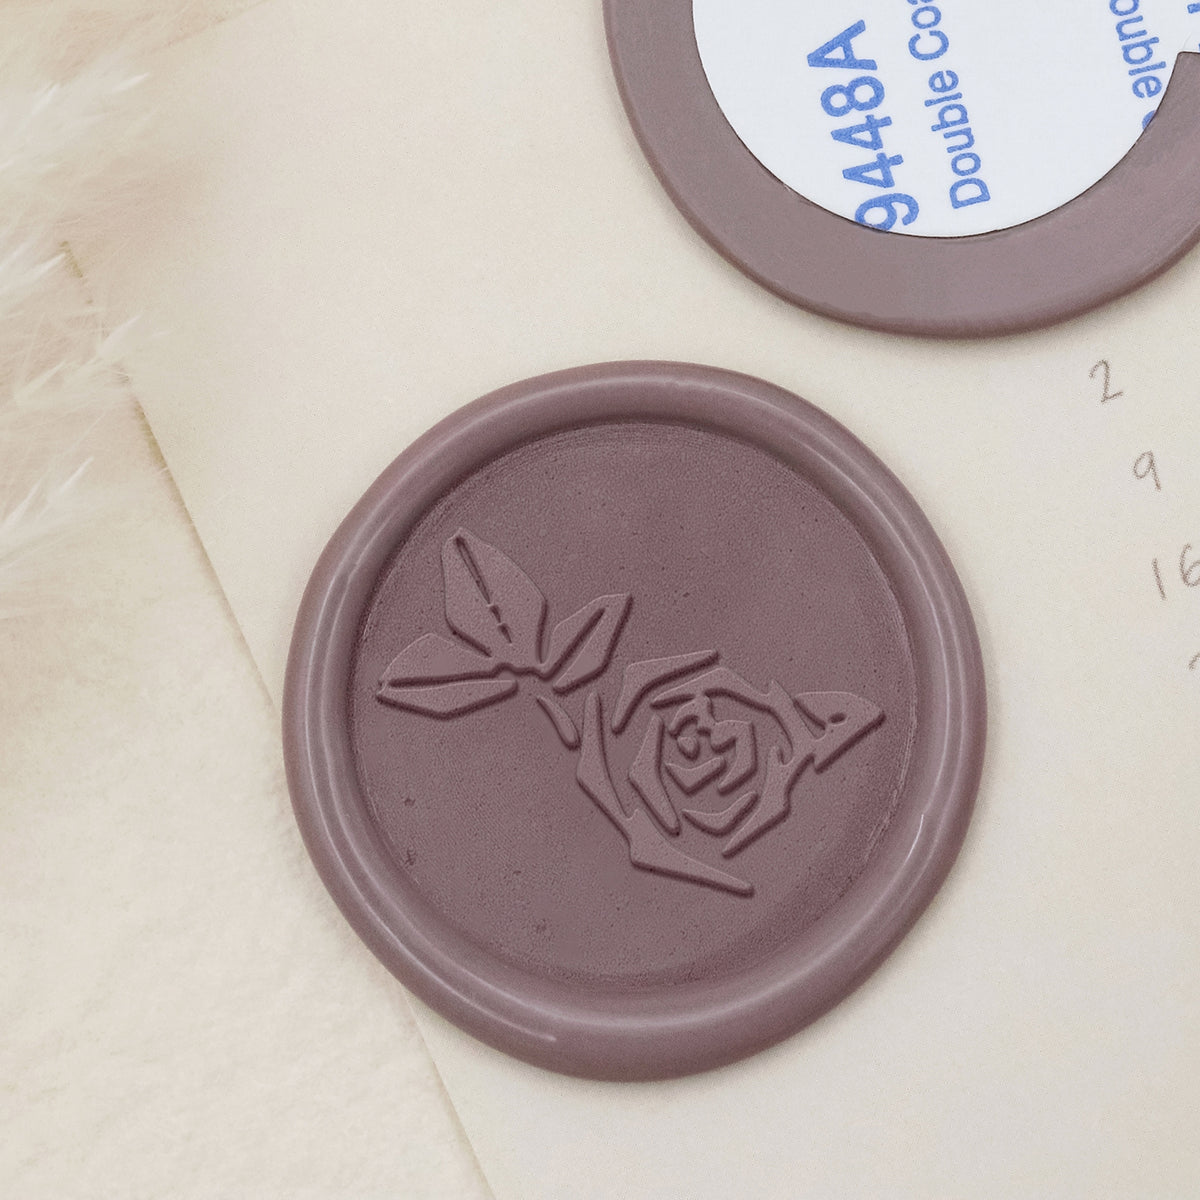 Stamprints Rose Self-adhesive Wax Seal Stickers - style 08-1